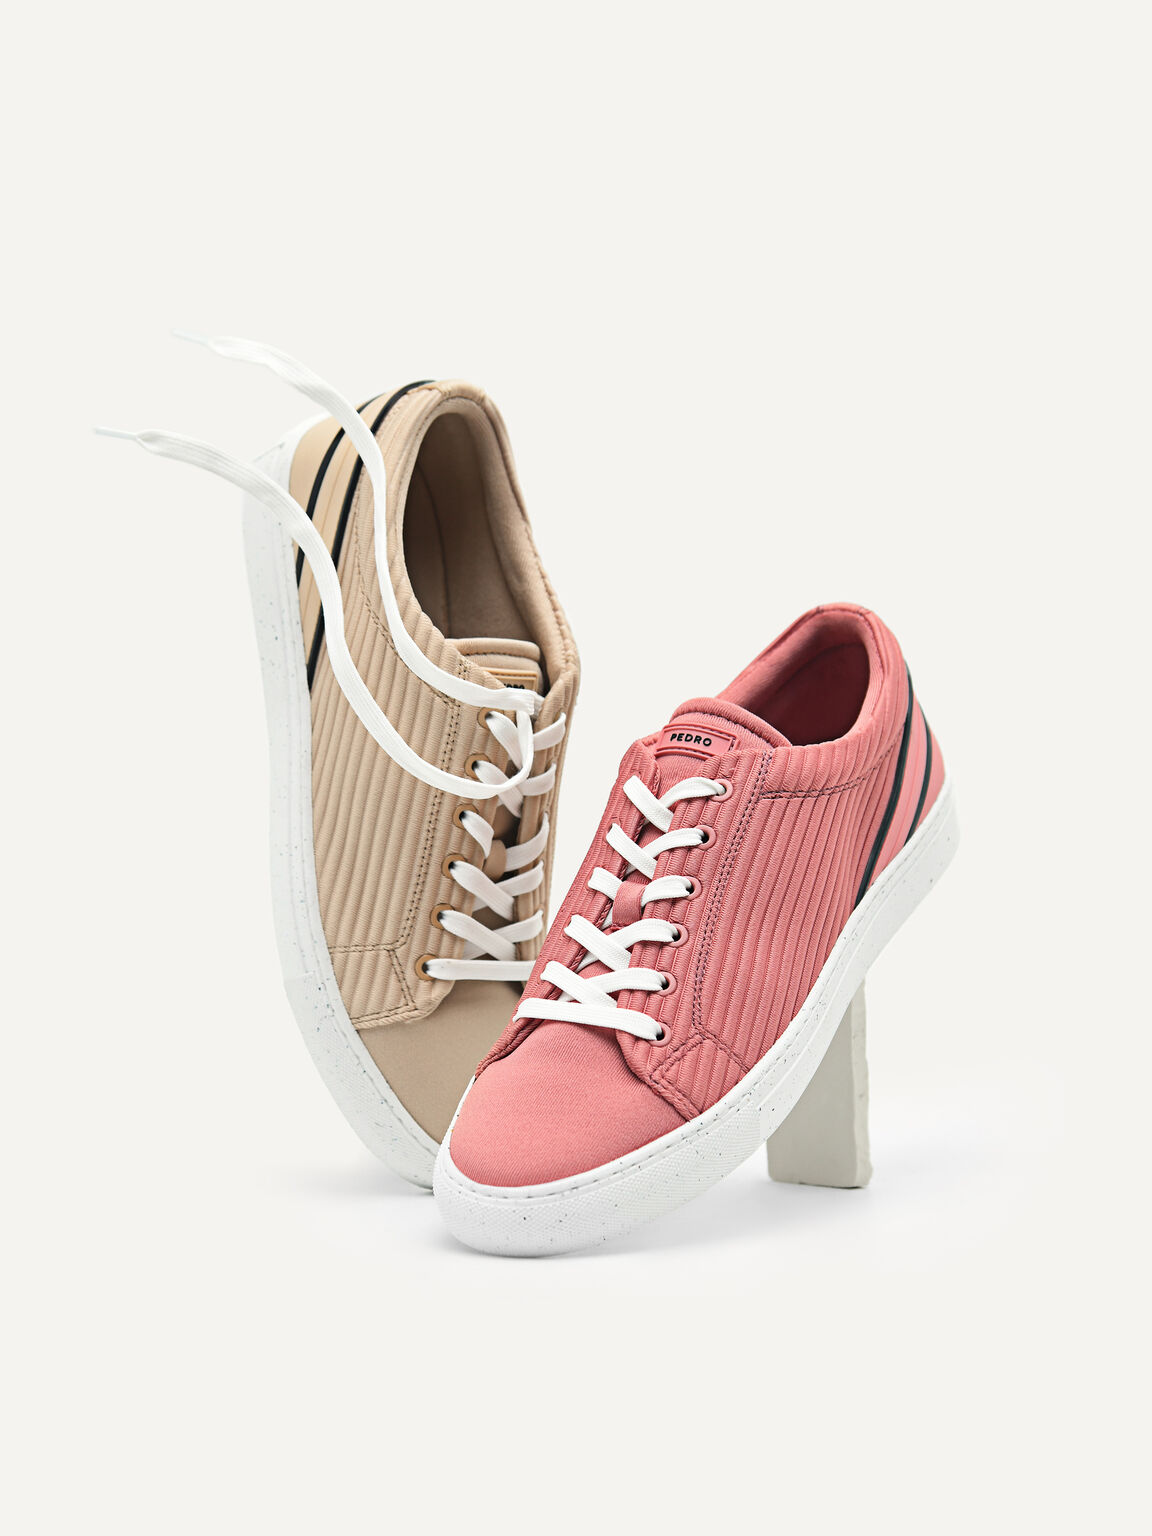 rePEDRO Pleated Sneakers, Nude, hi-res